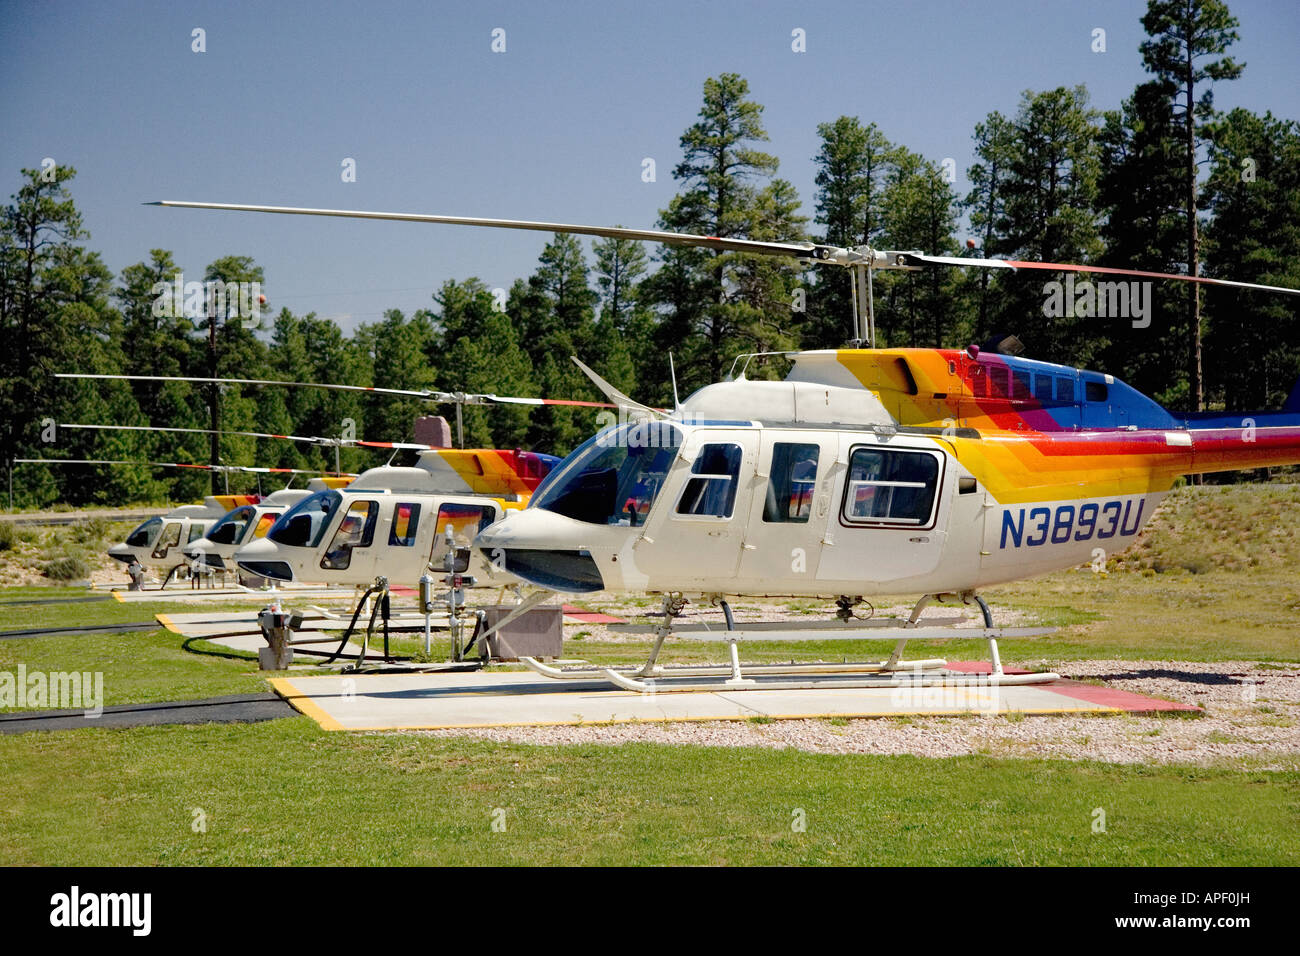 Four colorful helicopters parked in a row on cement tarmac, with pine trees and blue sky in background. Stock Photo